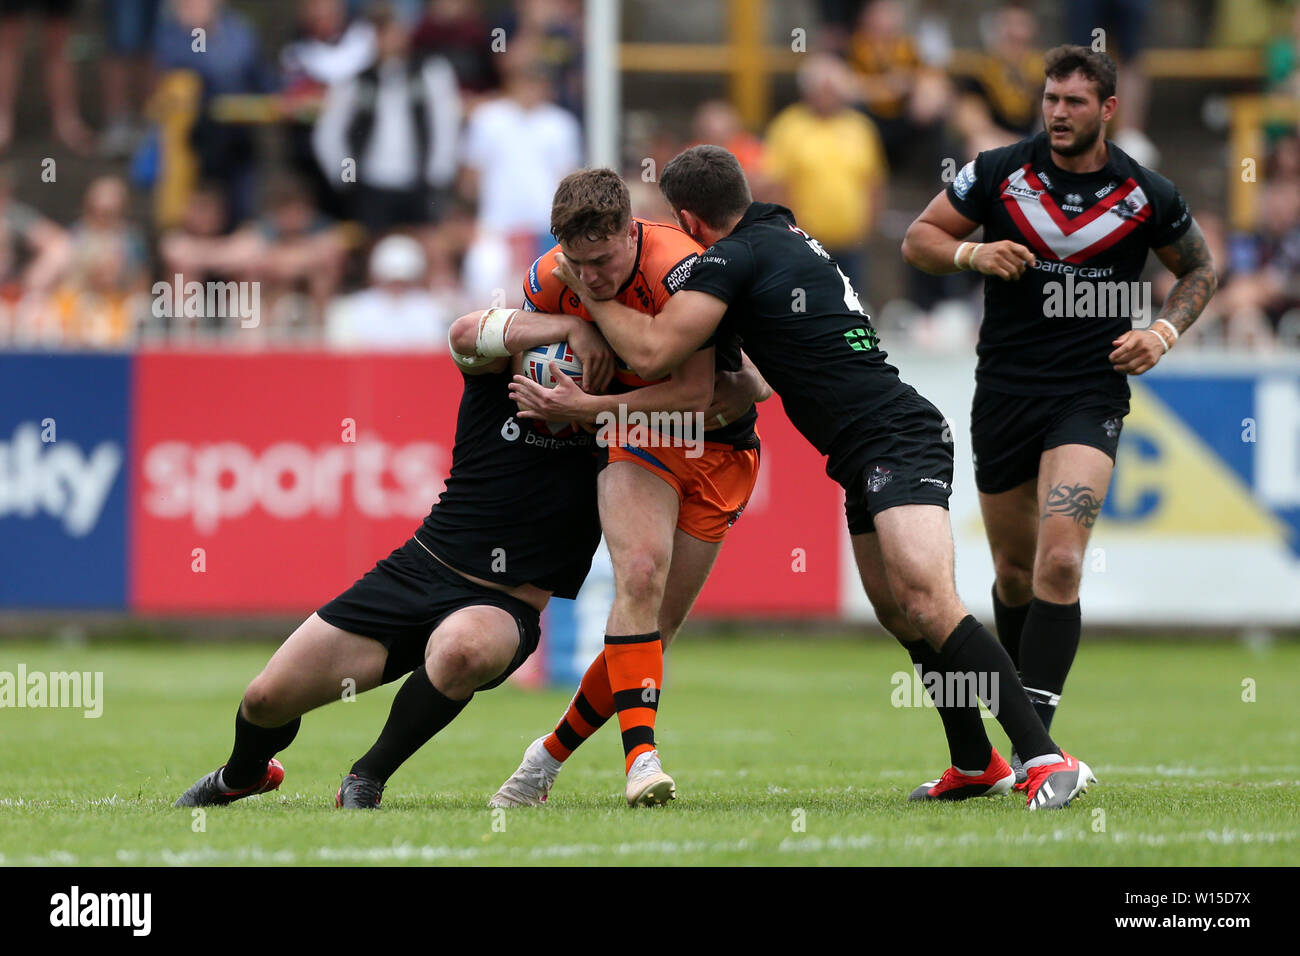 Castleford Tigers' Jake Trueman during the Betfred Super League match at the Mend-A-Hose Jungle, Castleford. Stock Photo